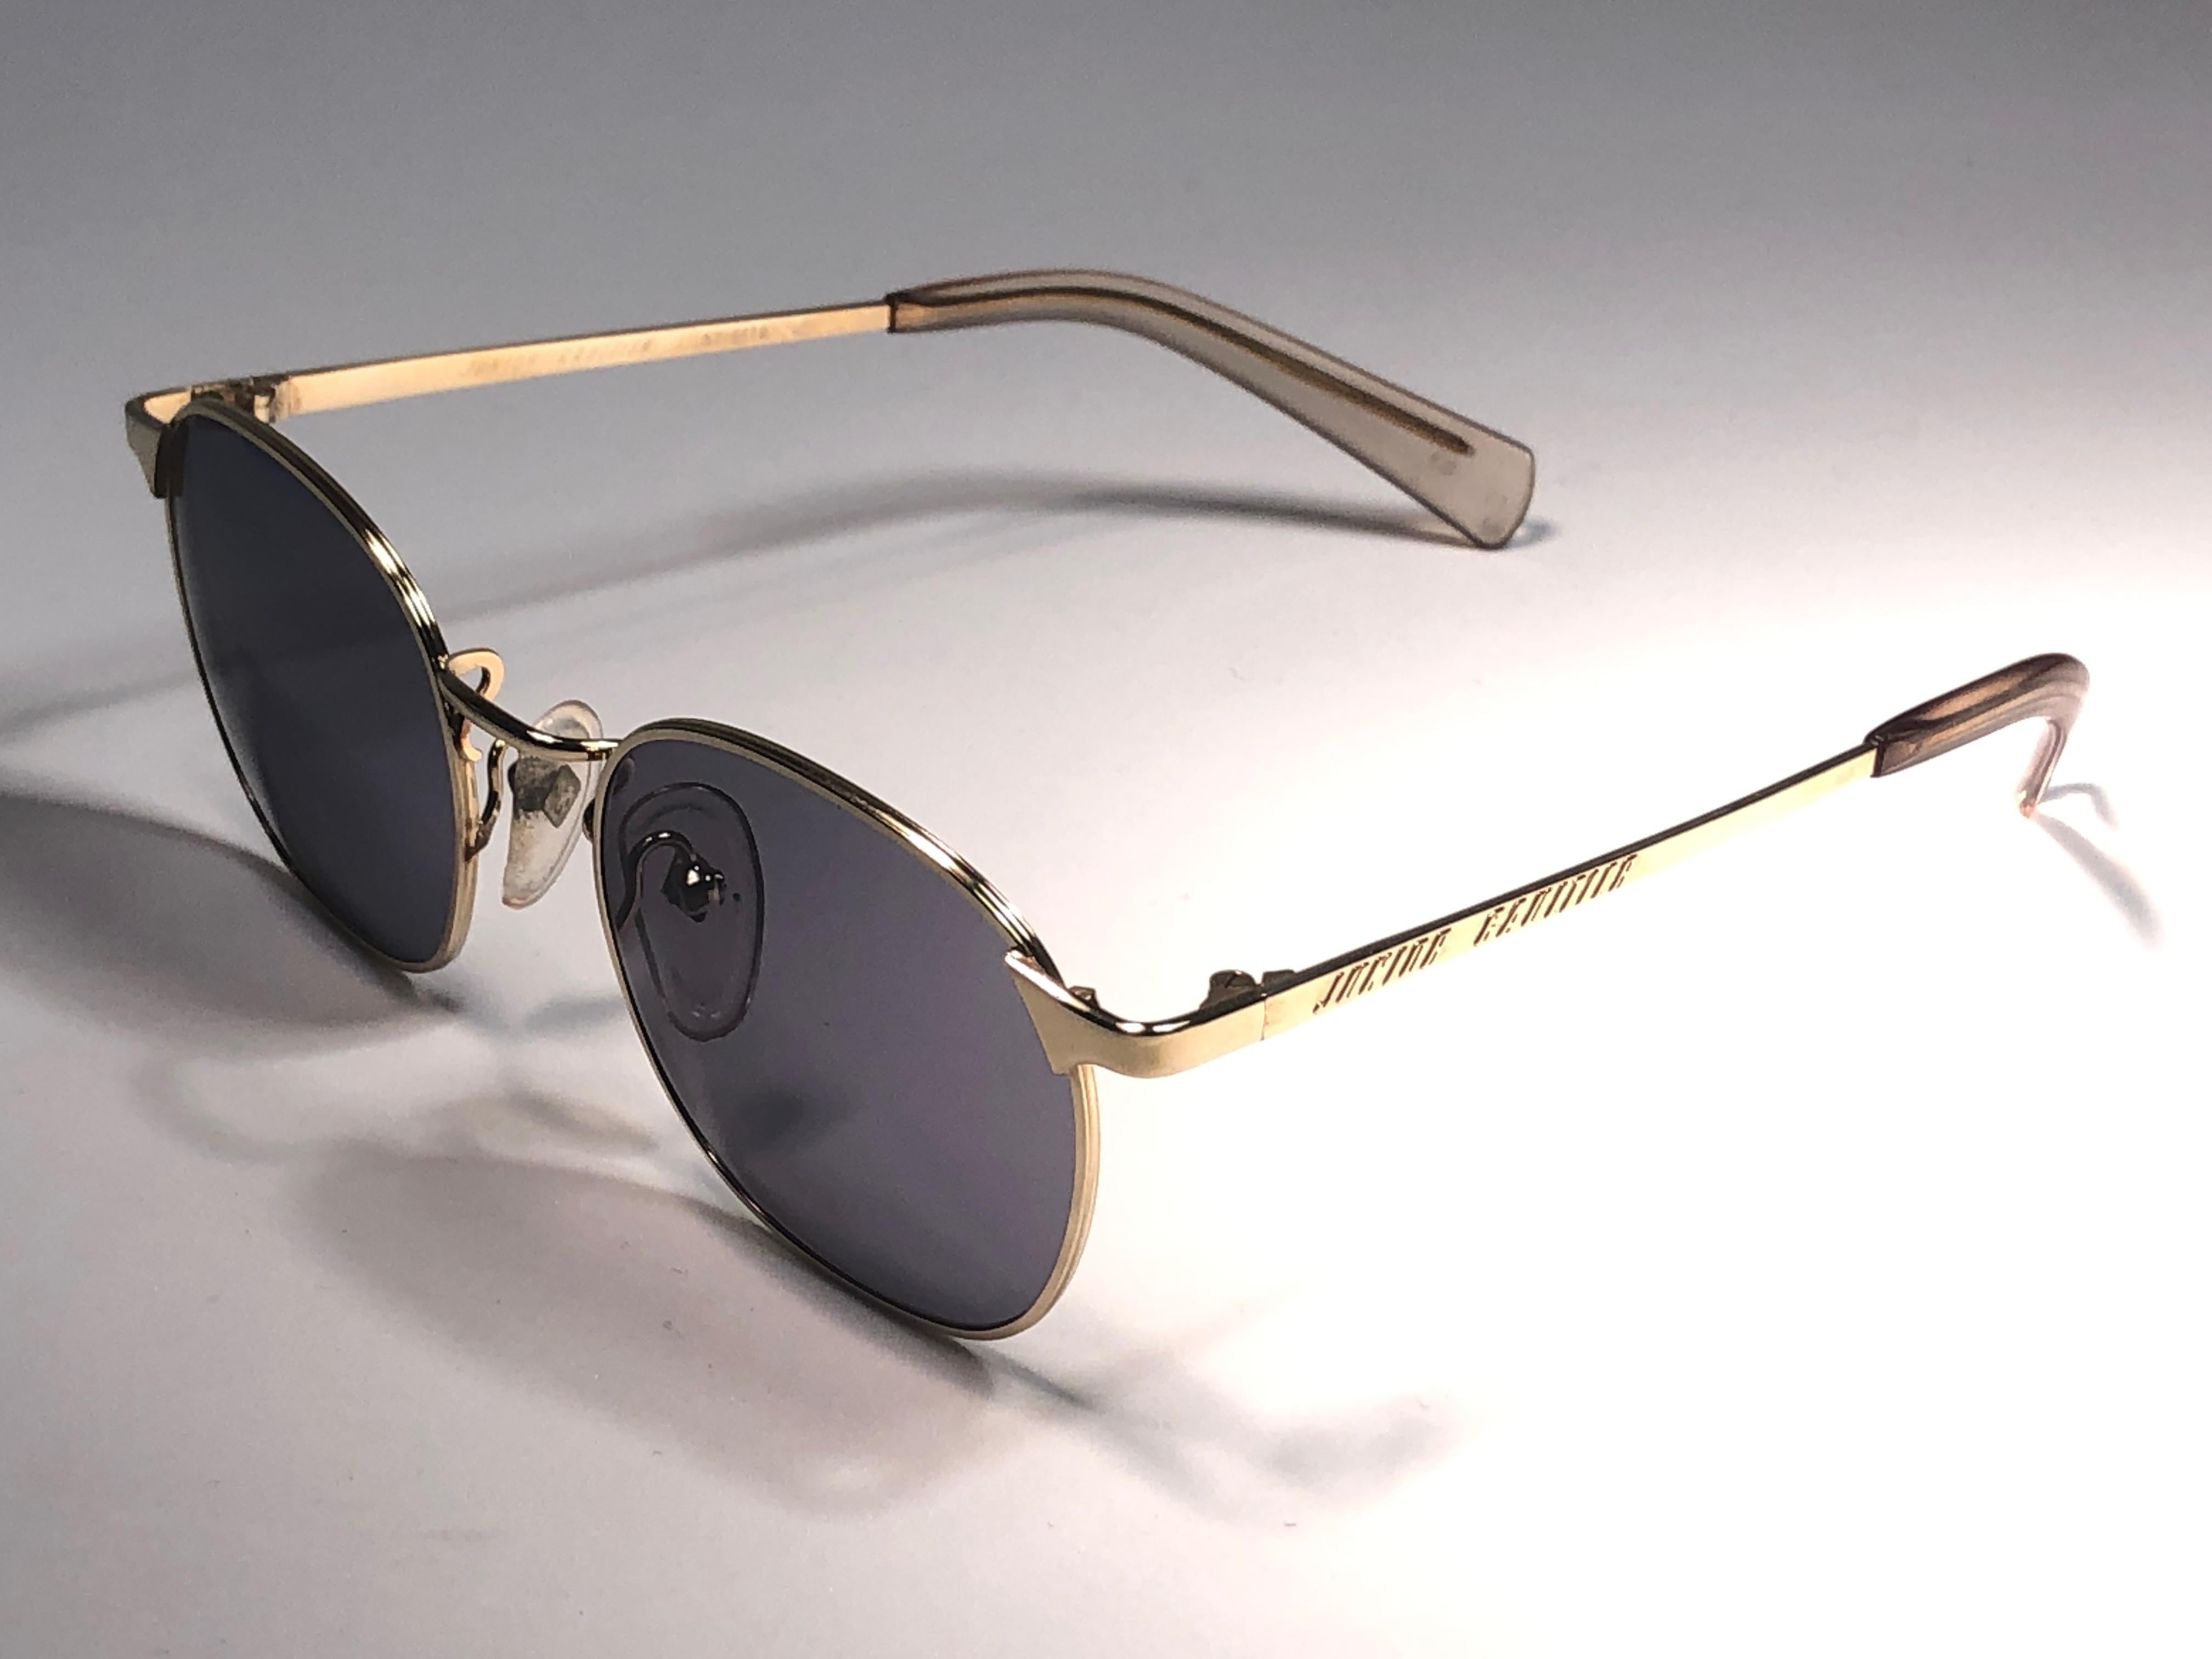 New Jean Paul Gaultier 57 0172 Oval Gold Sunglasses 1990's Made in Japan  For Sale 2